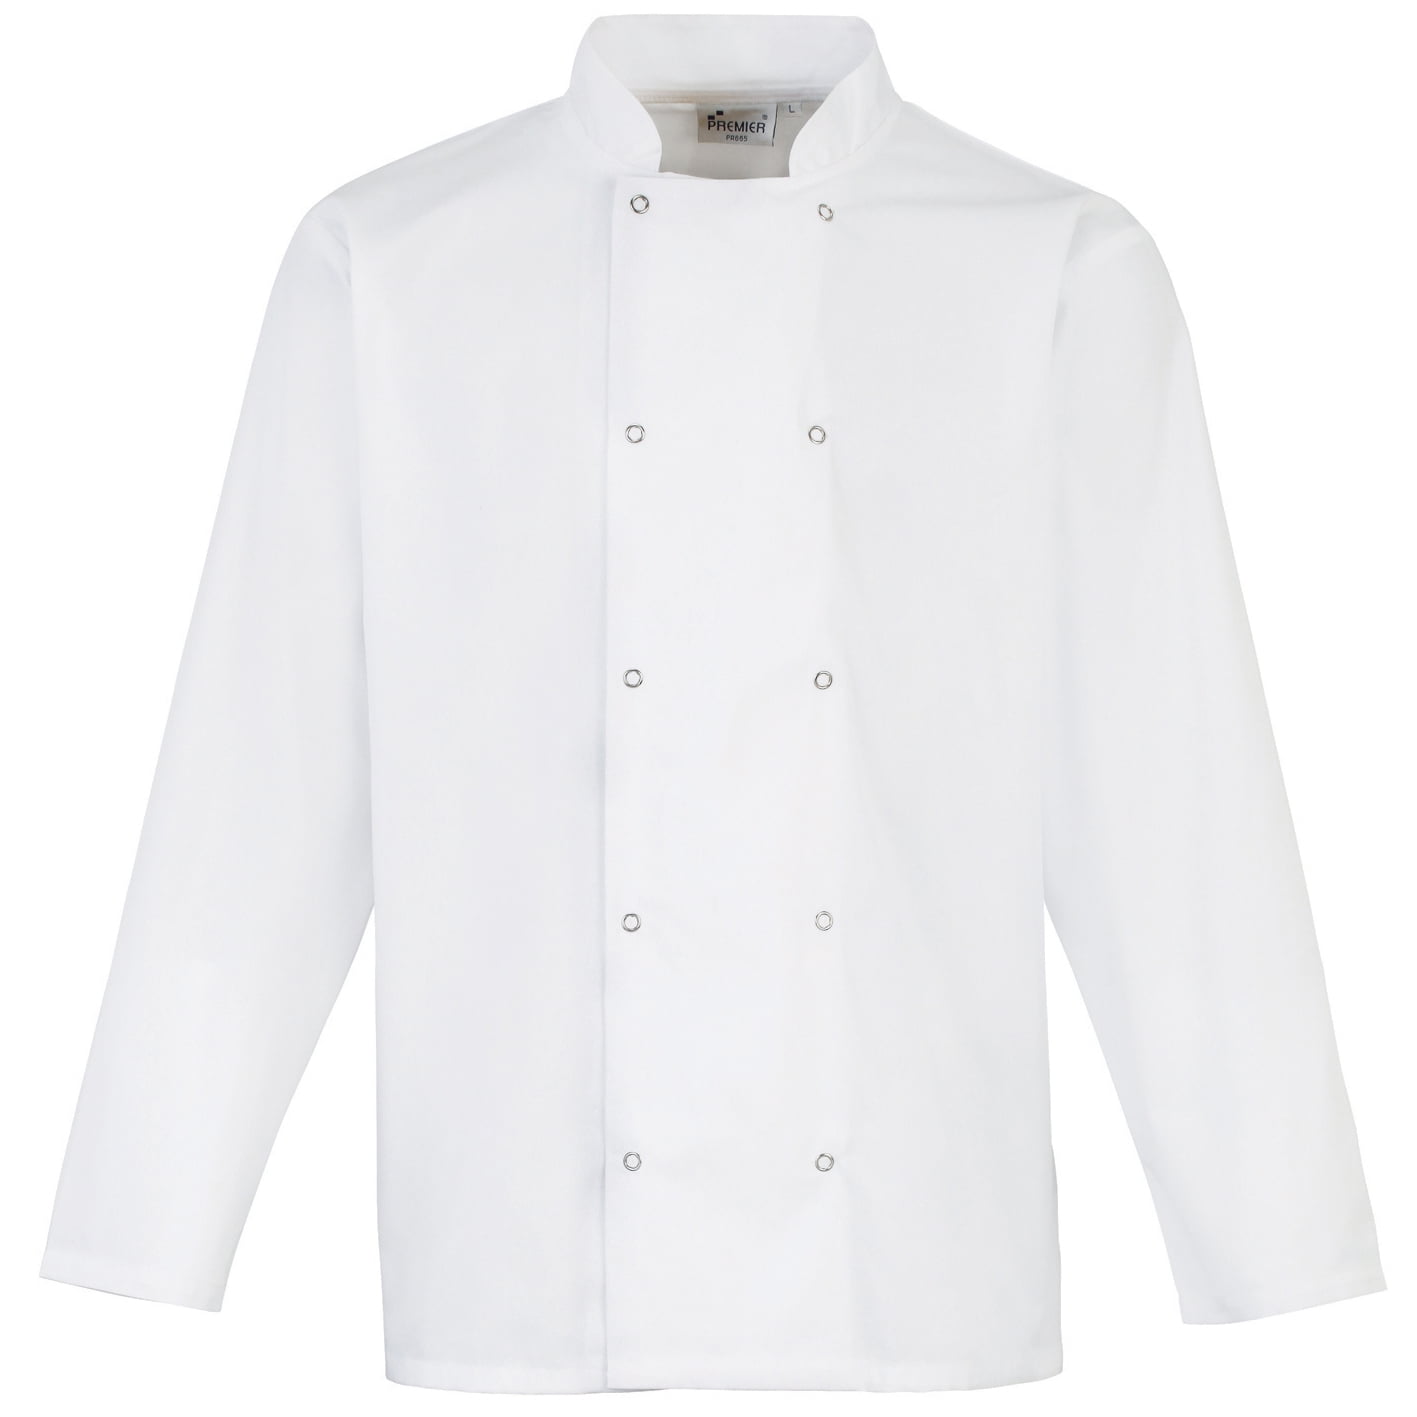 Women Personalised Embroidered Chef's Short Sleeve White Jacket PR670 